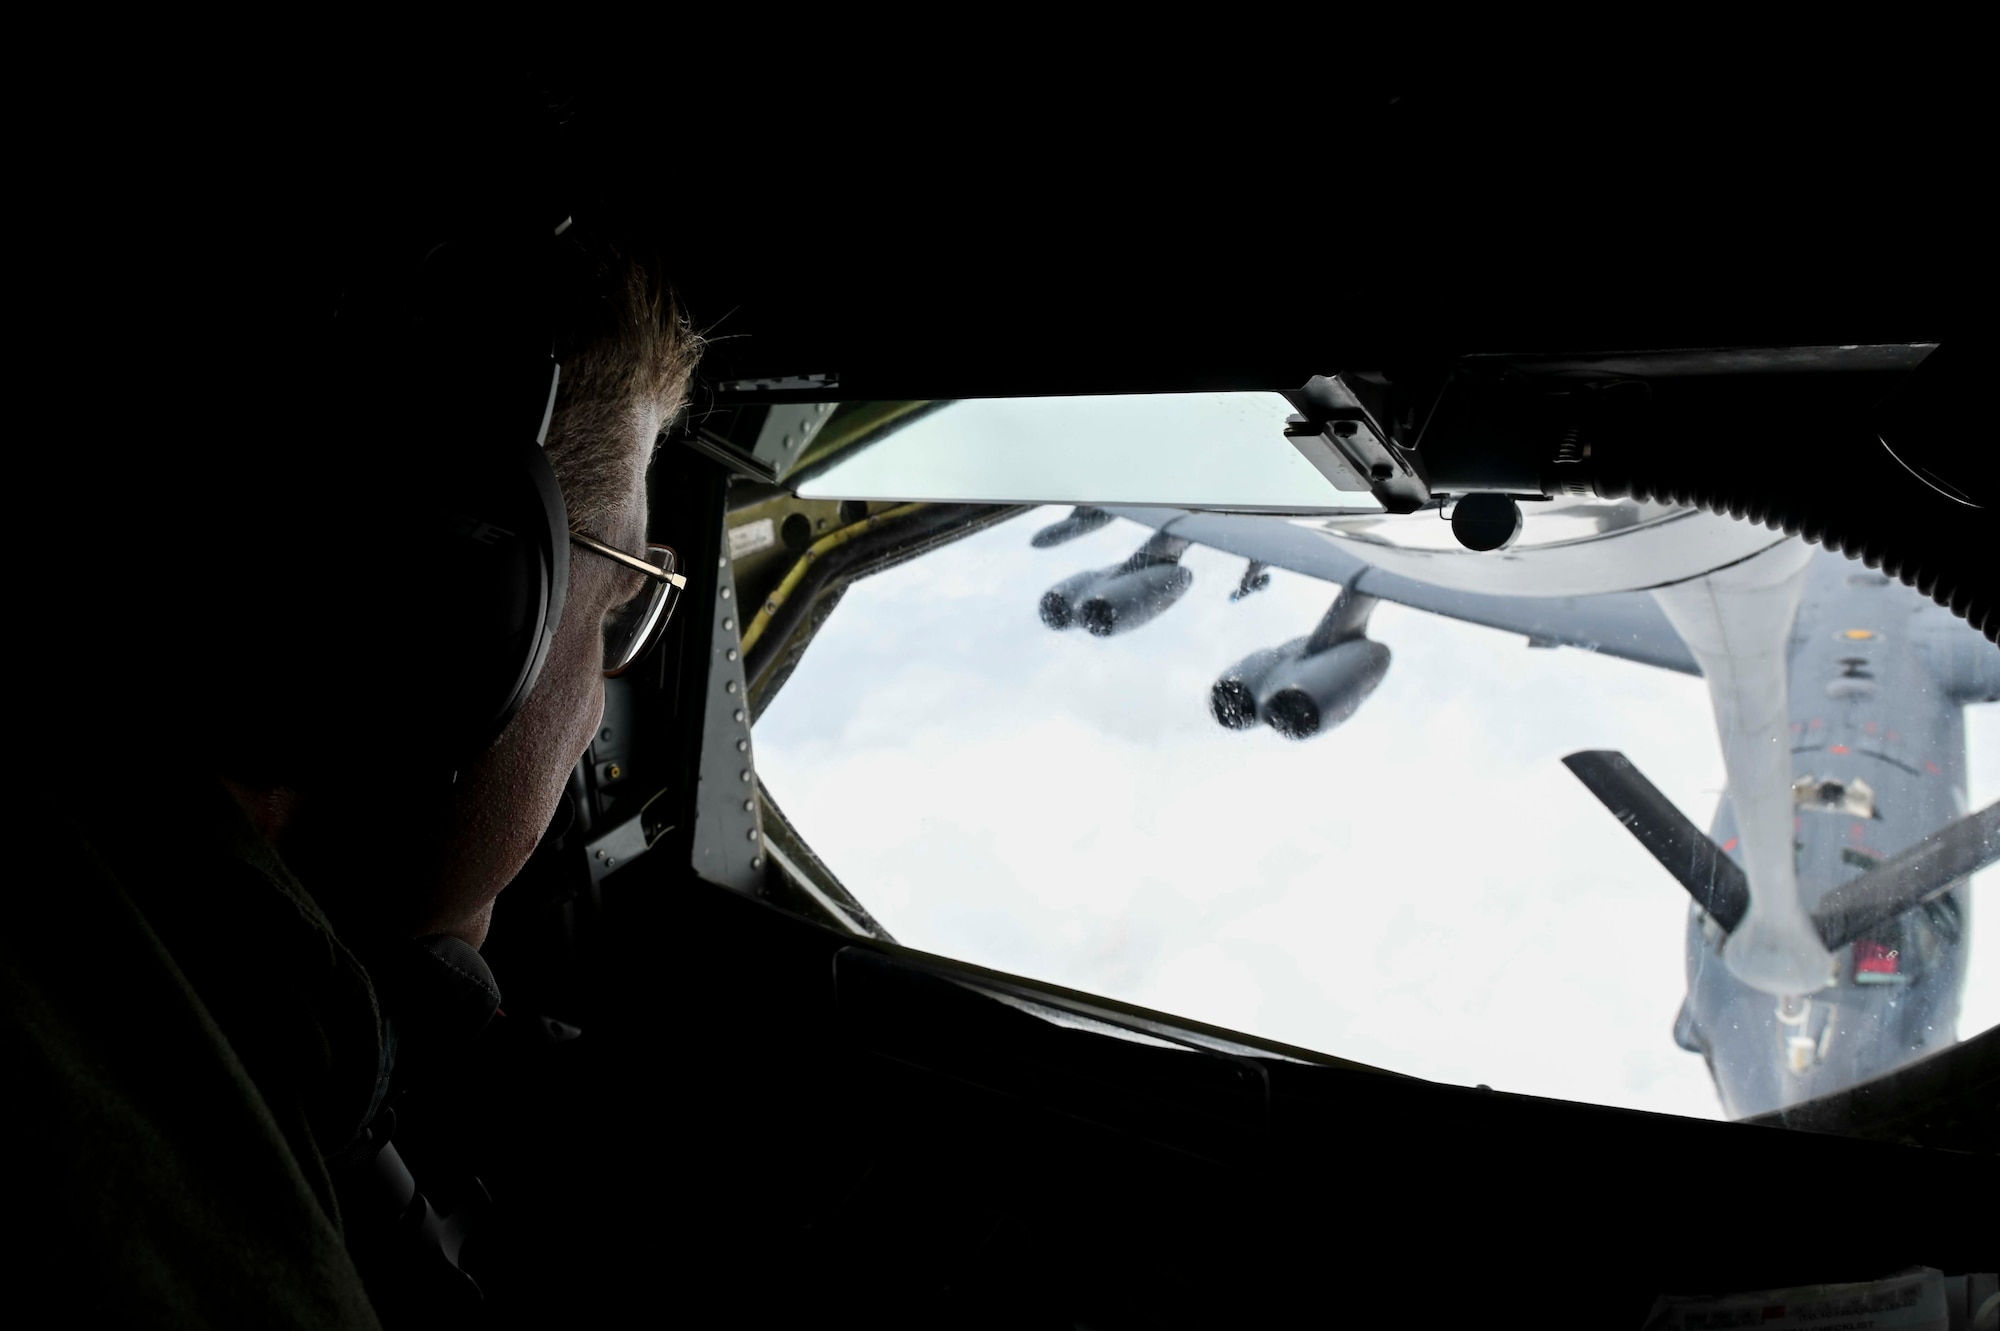 U.S. Air Force Tech Sgt. Steven Hannah, an in-flight refueling specialist assigned to the 384th Air Refueling Squadron, performs an aerial refueling demonstration as part of Operation Centennial Contact out of Fairchild Air Force Base, Washington, June 27, 2023. The movement, which included stops at Yellowstone National Park, Mount Rushmore, and Glacier National Park, was part of Air Mobility Command’s celebration of 100 years air refueling operations and demonstrated the 92nd Air Refueling Wing’s global reach capabilities. Since its inception in 1923, air refueling has become a crucial component of military and civilian aviation operations around the world by extending the range and endurance of aircraft and enabling them to complete missions that would otherwise be impossible or require multiple stops. As a result, this capability is essential for strategic and tactical operations, as well as humanitarian relief efforts in support of AMC, U.S. Transportation Command and Department of Defense priorities. (U.S. Air Force photo by Airman 1st Class Haiden Morris)